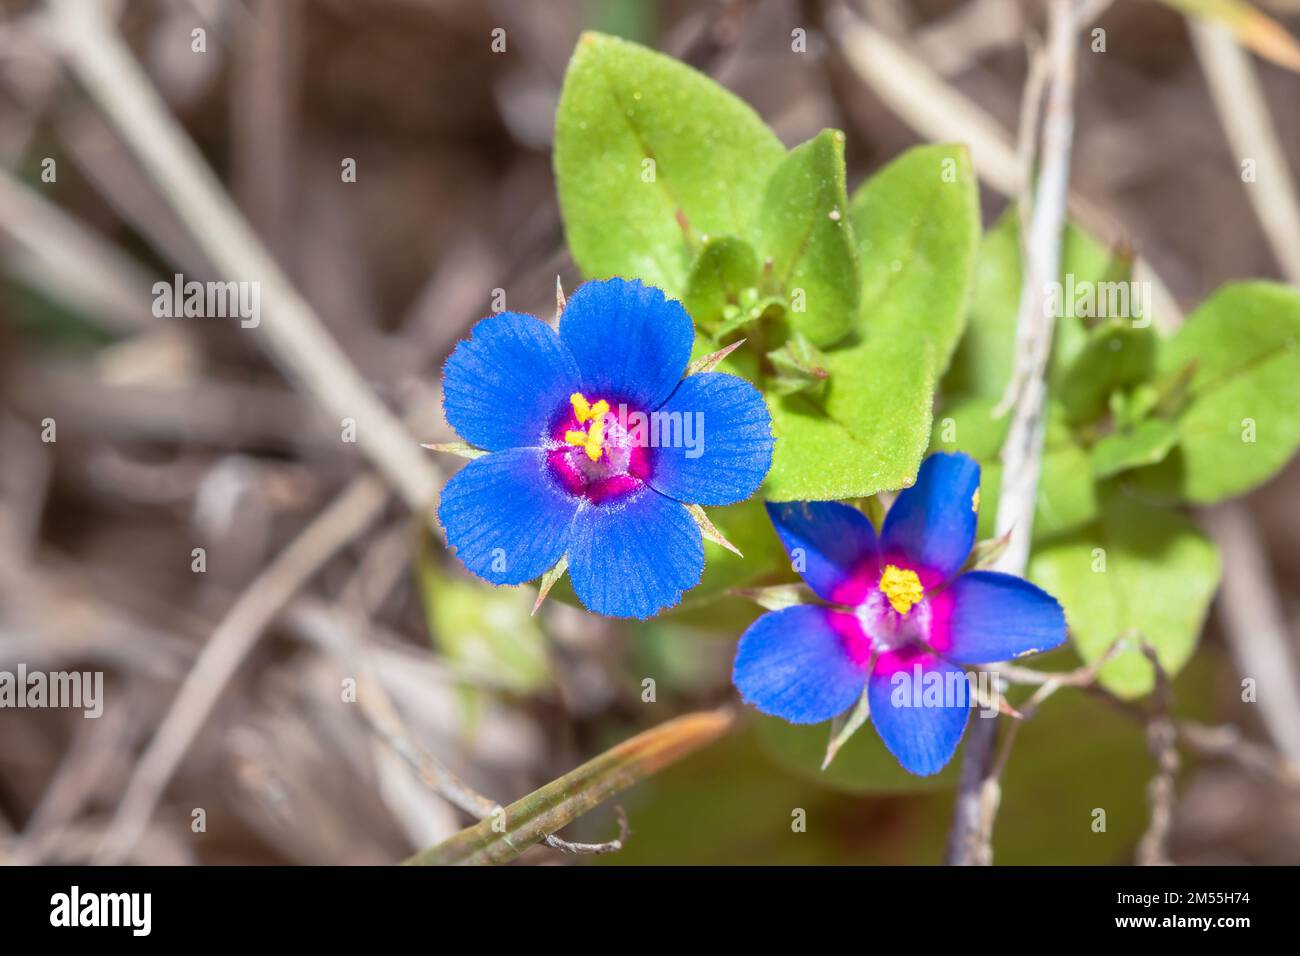 Blue pimpernel (Lysimachia monellii) Wild flower growing during spring, Cape Town, South Africa Stock Photo